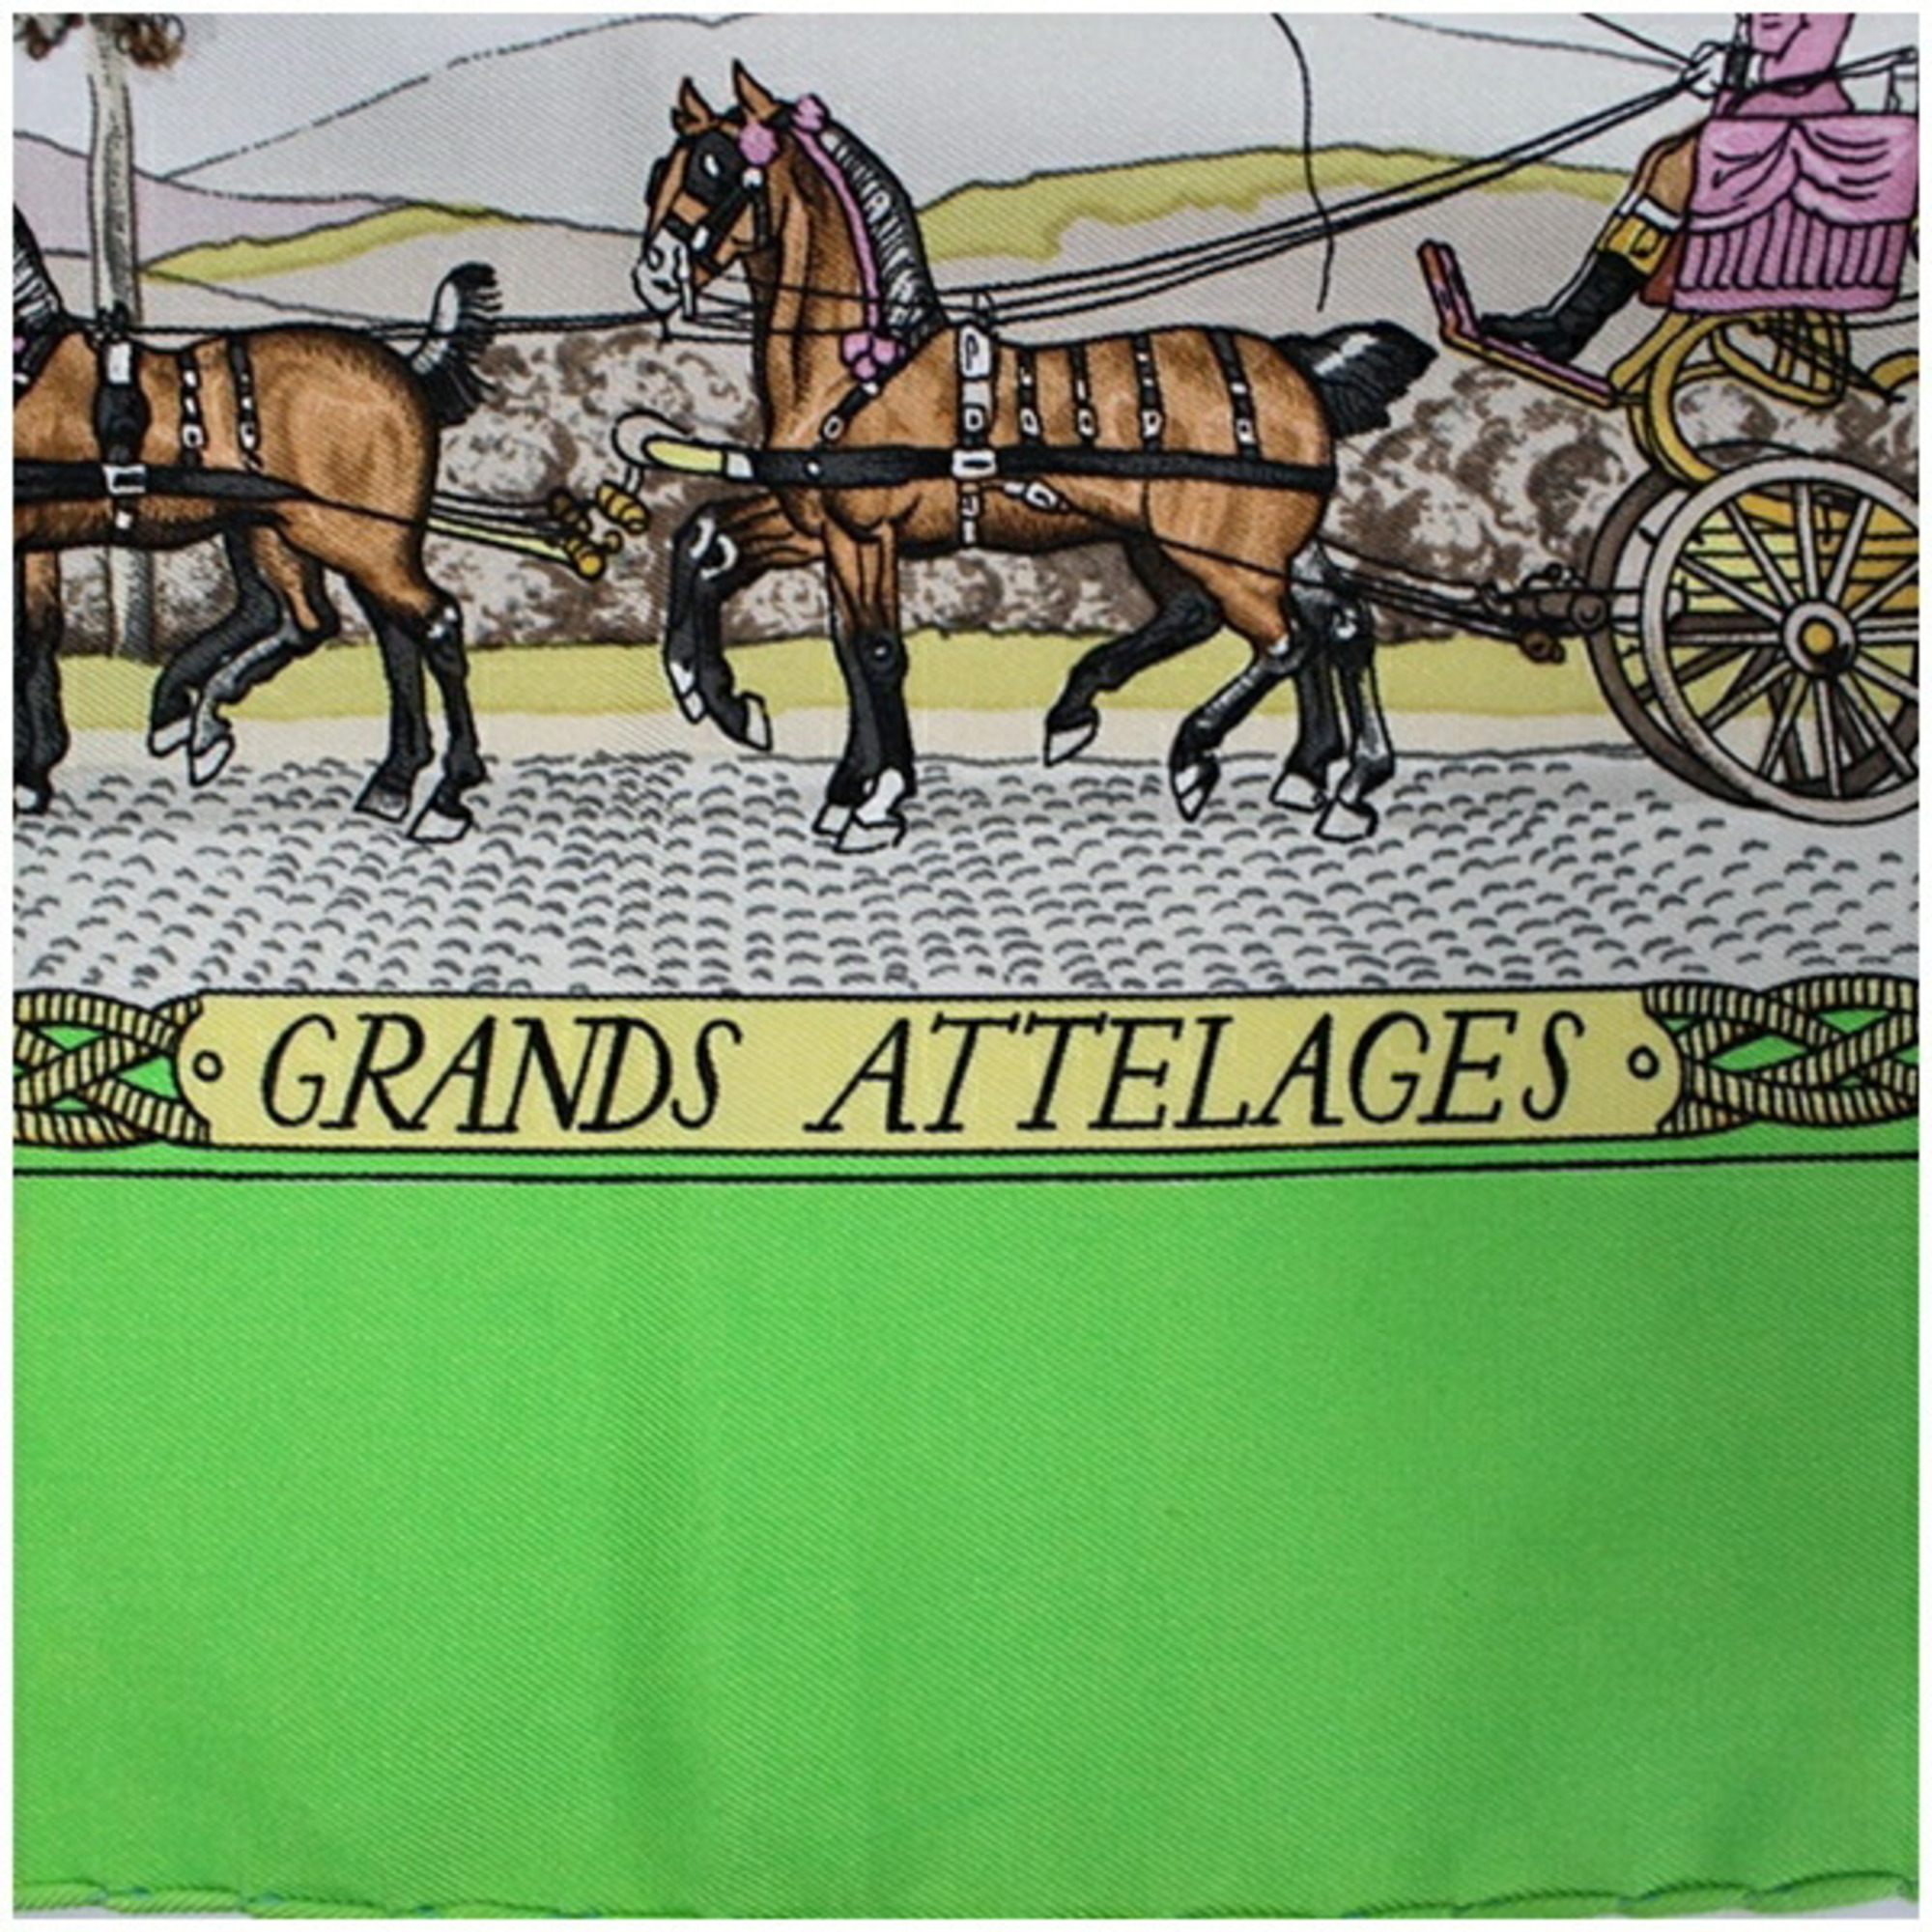 Hermes Carre 90 Silk Scarf Muffler GRANDS ATTELAGES Light Green x White Ladies Carriage Horse Tackle